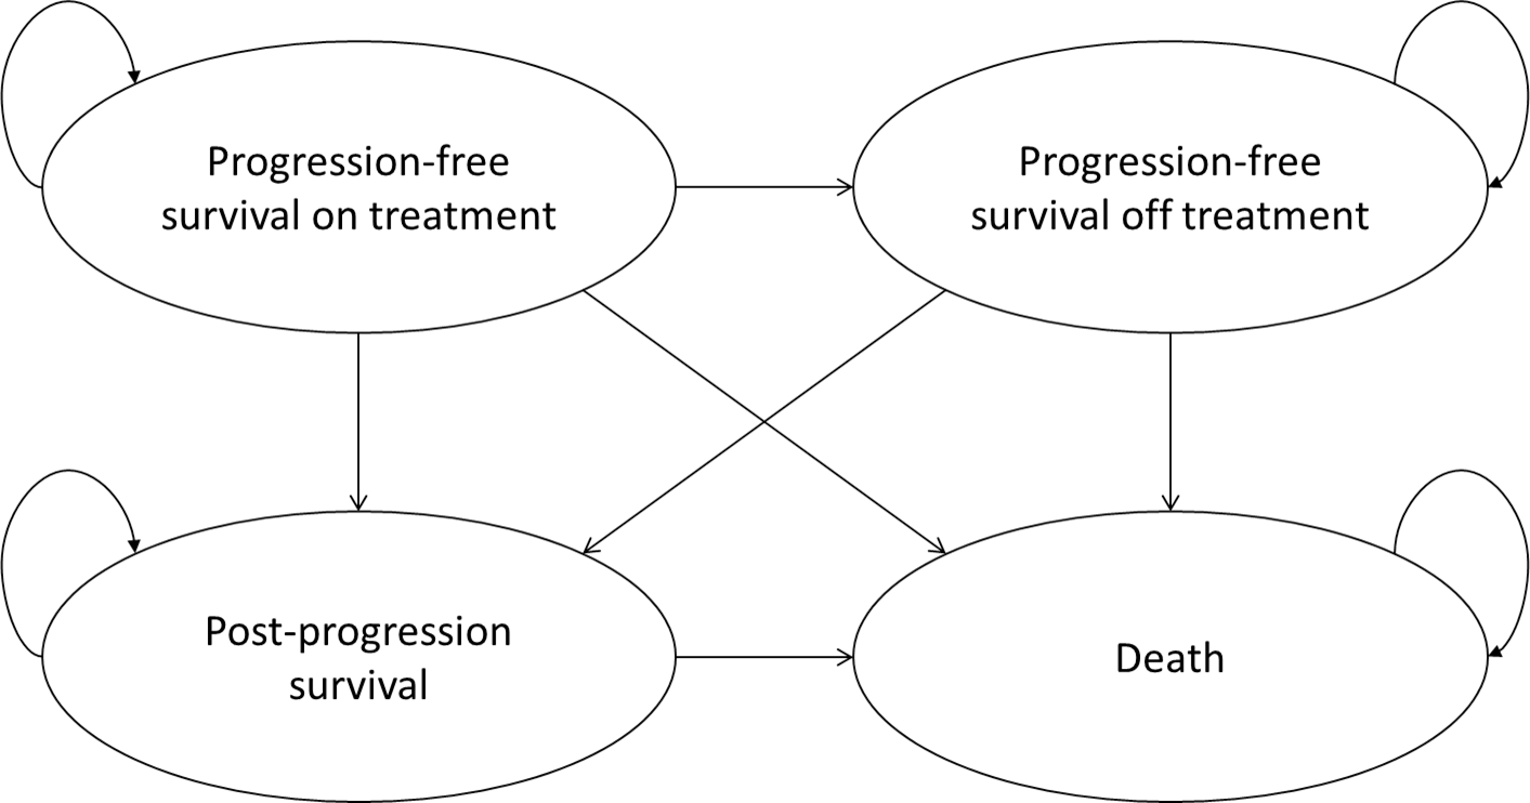 The diagram outlines how patients progress through the sponsor’s model from progression-free survival on treatment, to progression-free survival off treatment, to post-progression survival, to death. Arrows indicate movement from each state to the others, with the final state being death.